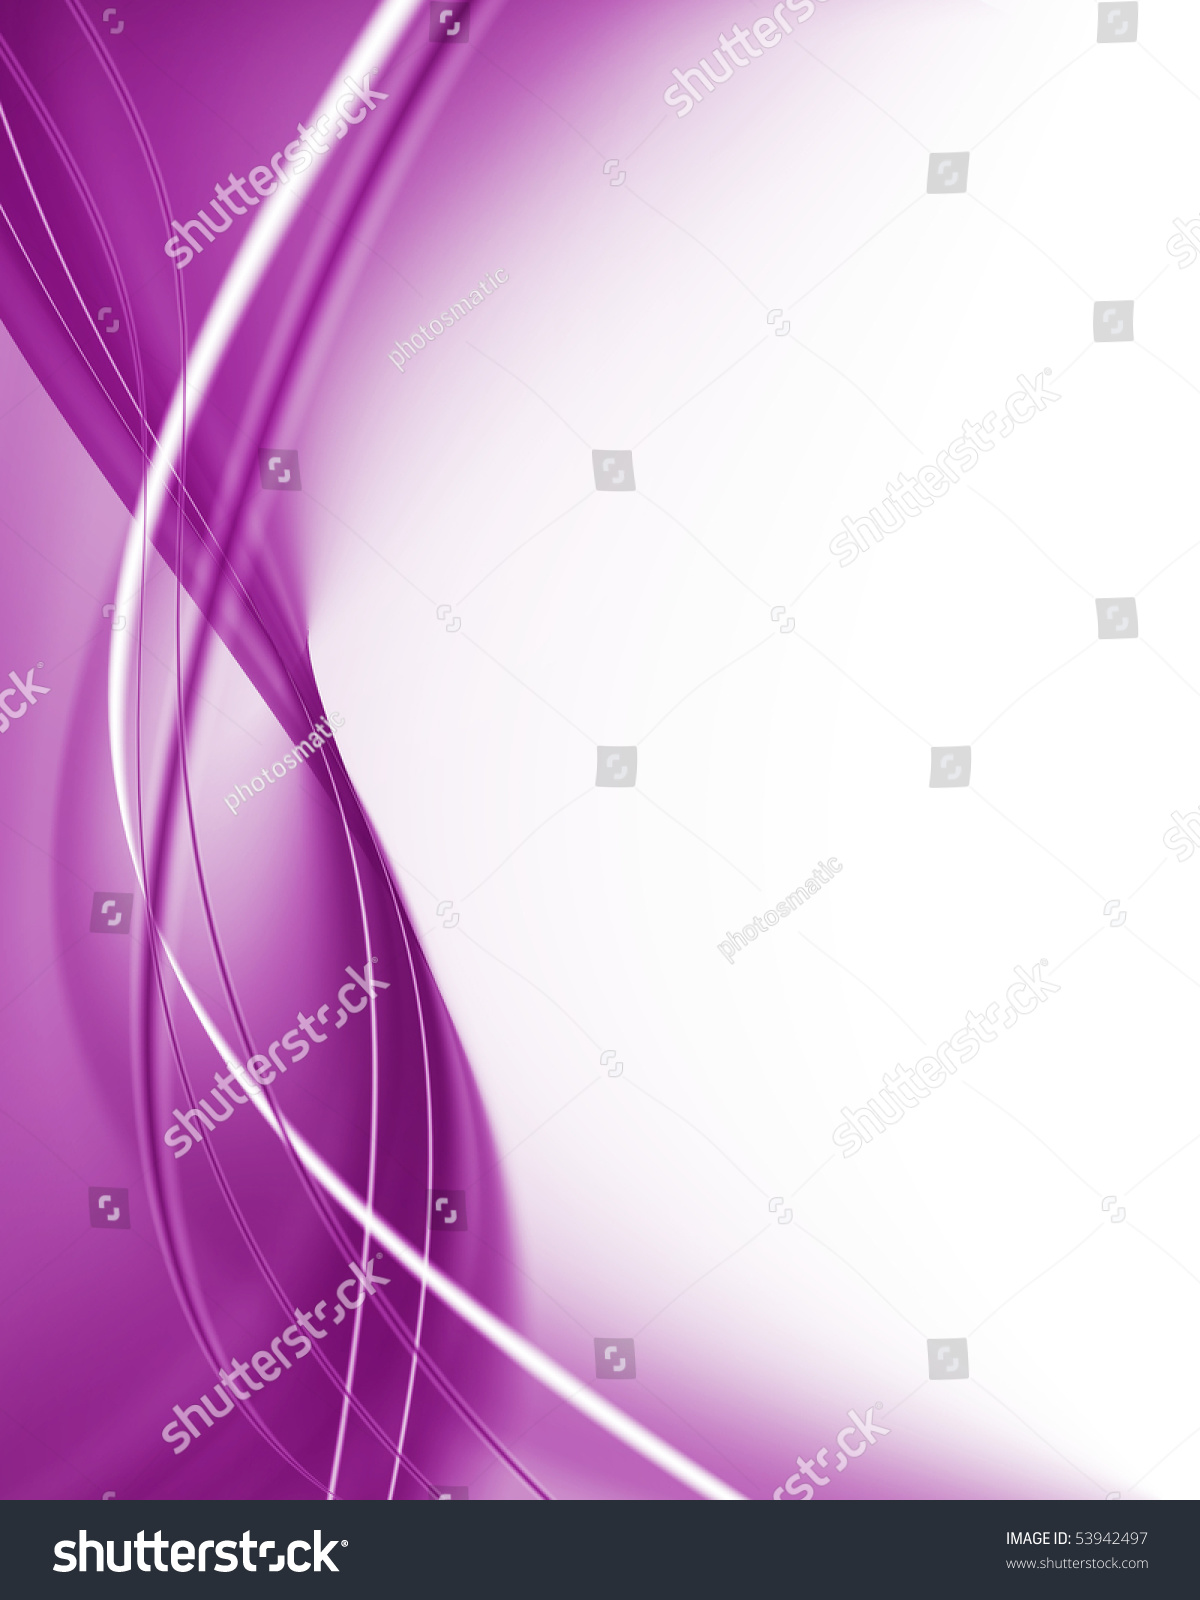 Soft Abstract Background Stock Photo 53942497 : Shutterstock